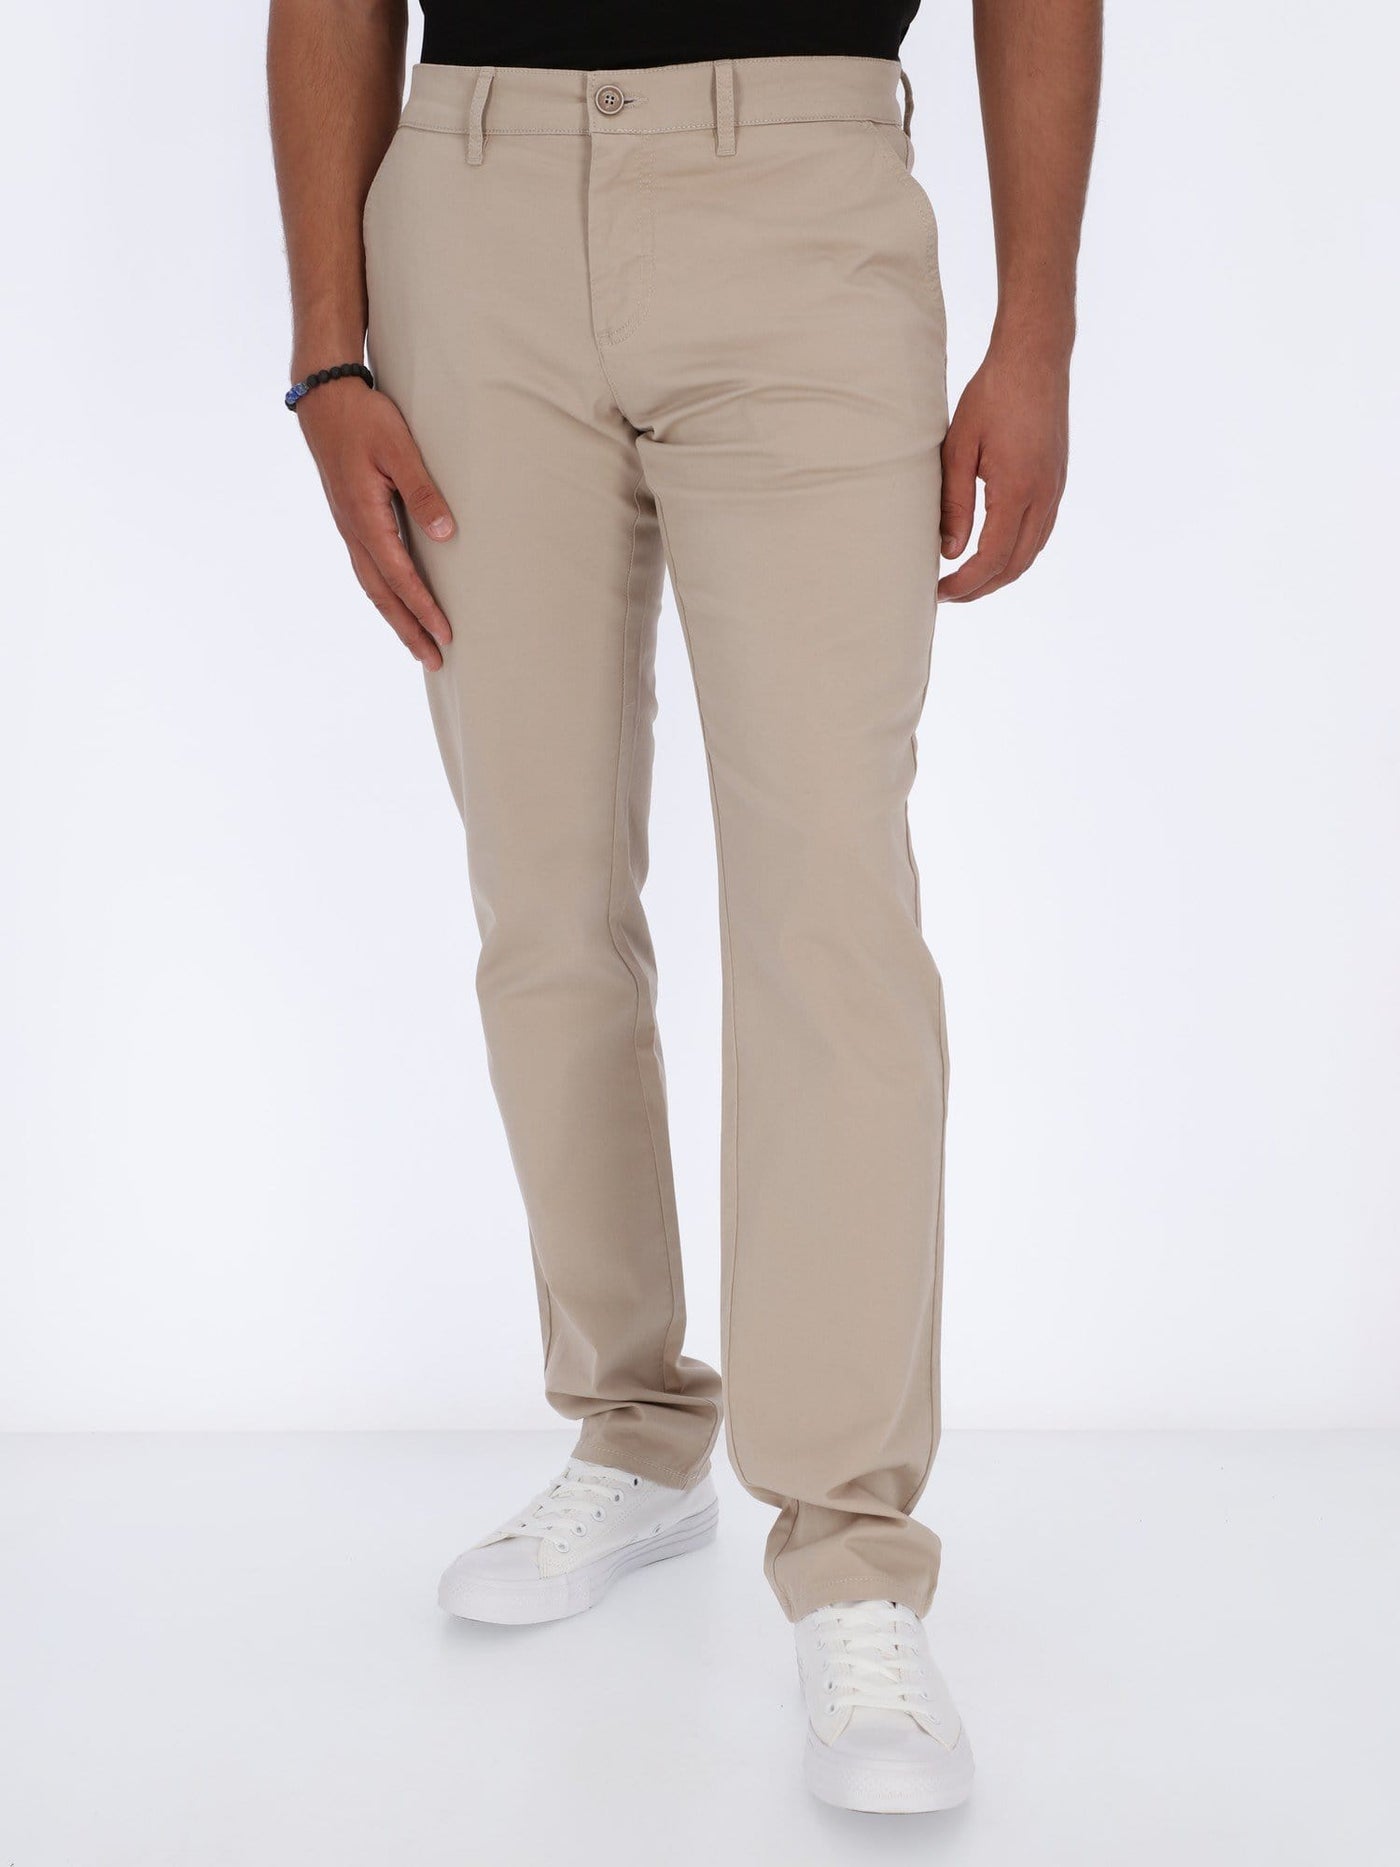 Daniel Hechter Pants & Shorts BEIGE / 40 Basic Chino Pants with Side Pockets